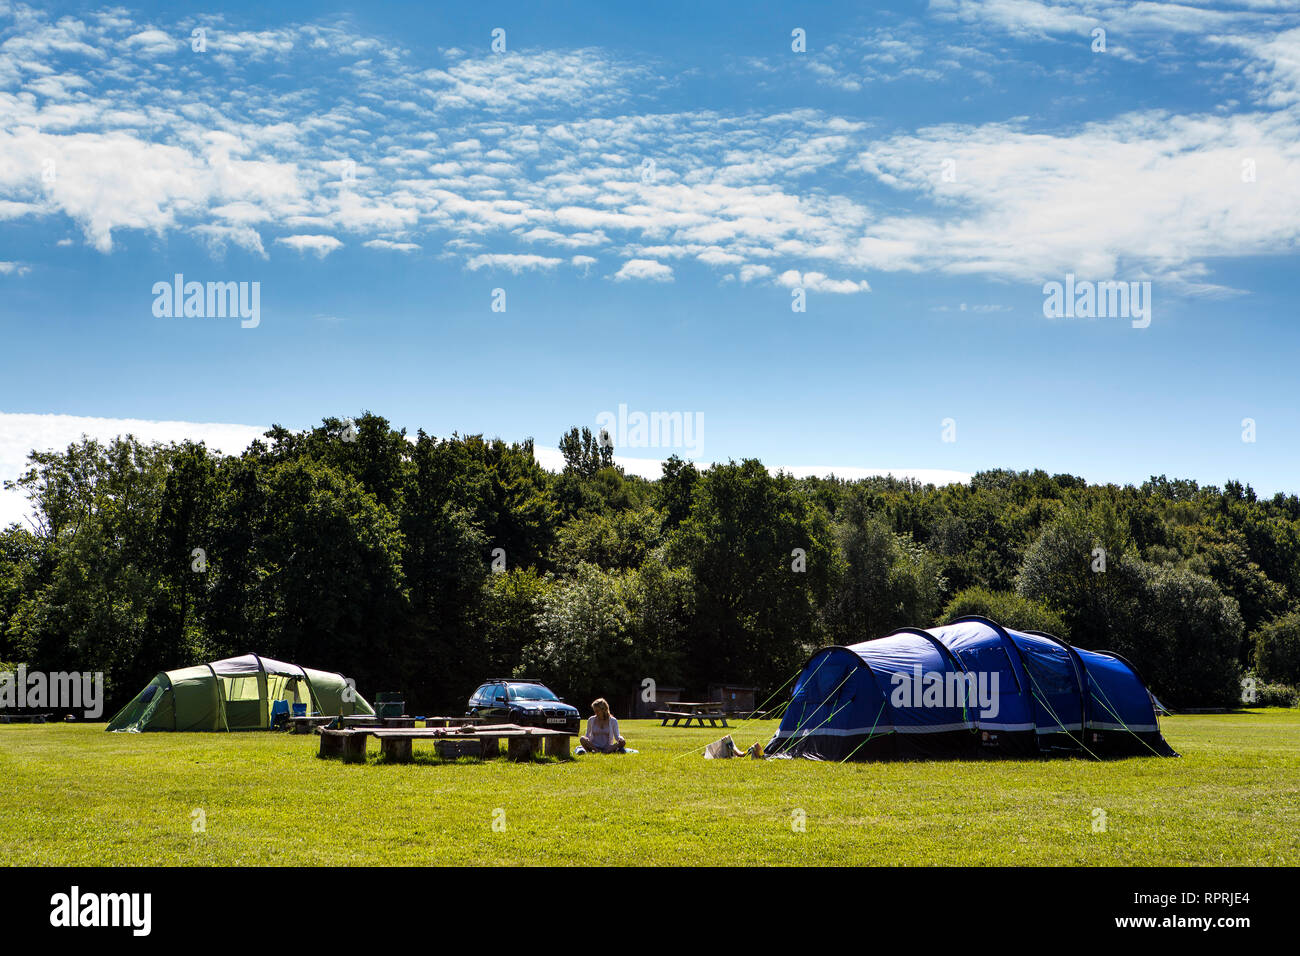 Summer camping scene at a Sussex campsite, UK Stock Photo